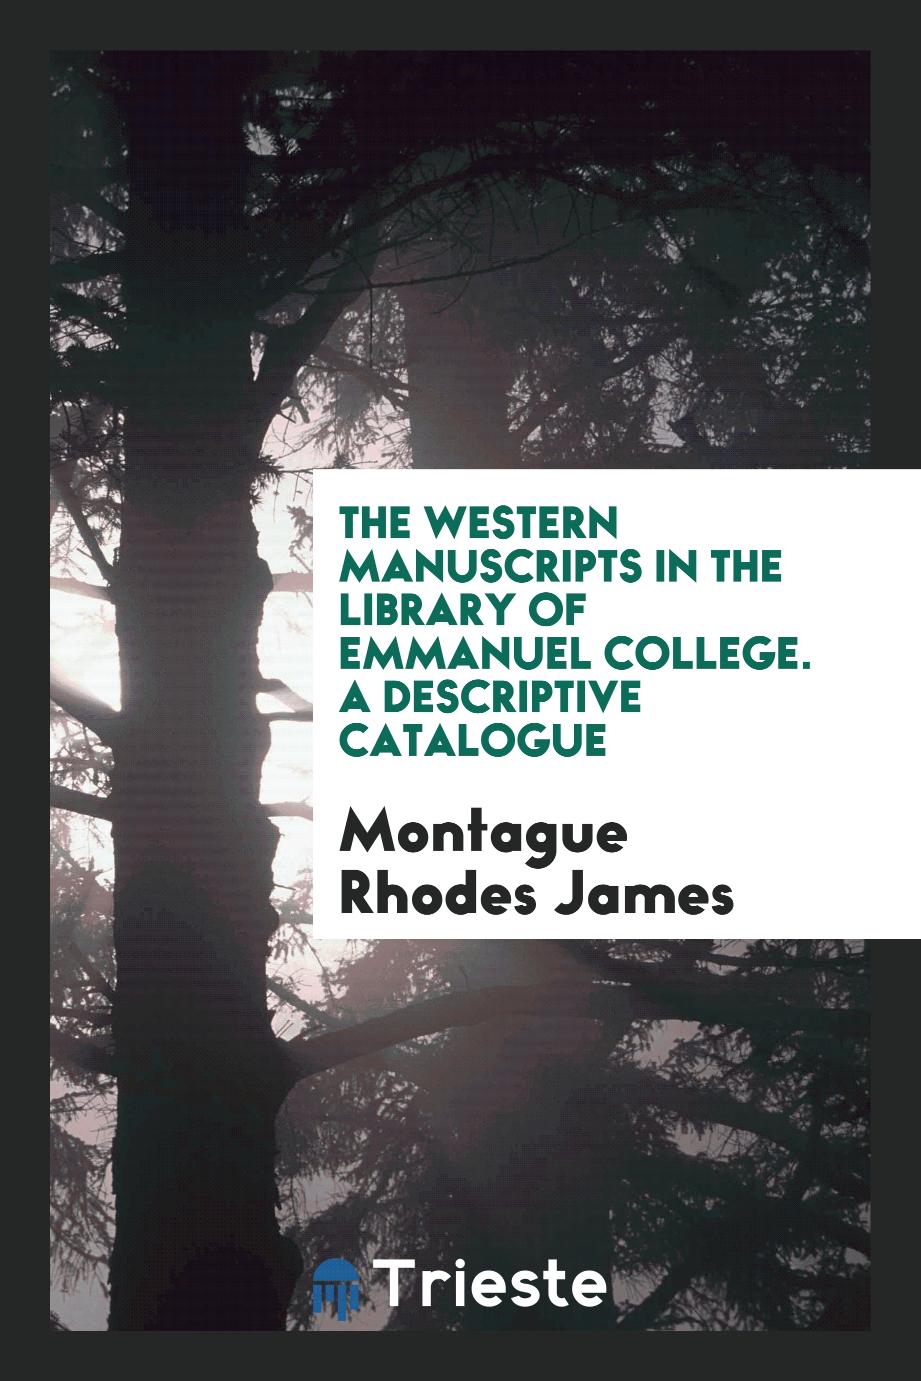 The Western manuscripts in the library of Emmanuel College. A descriptive catalogue